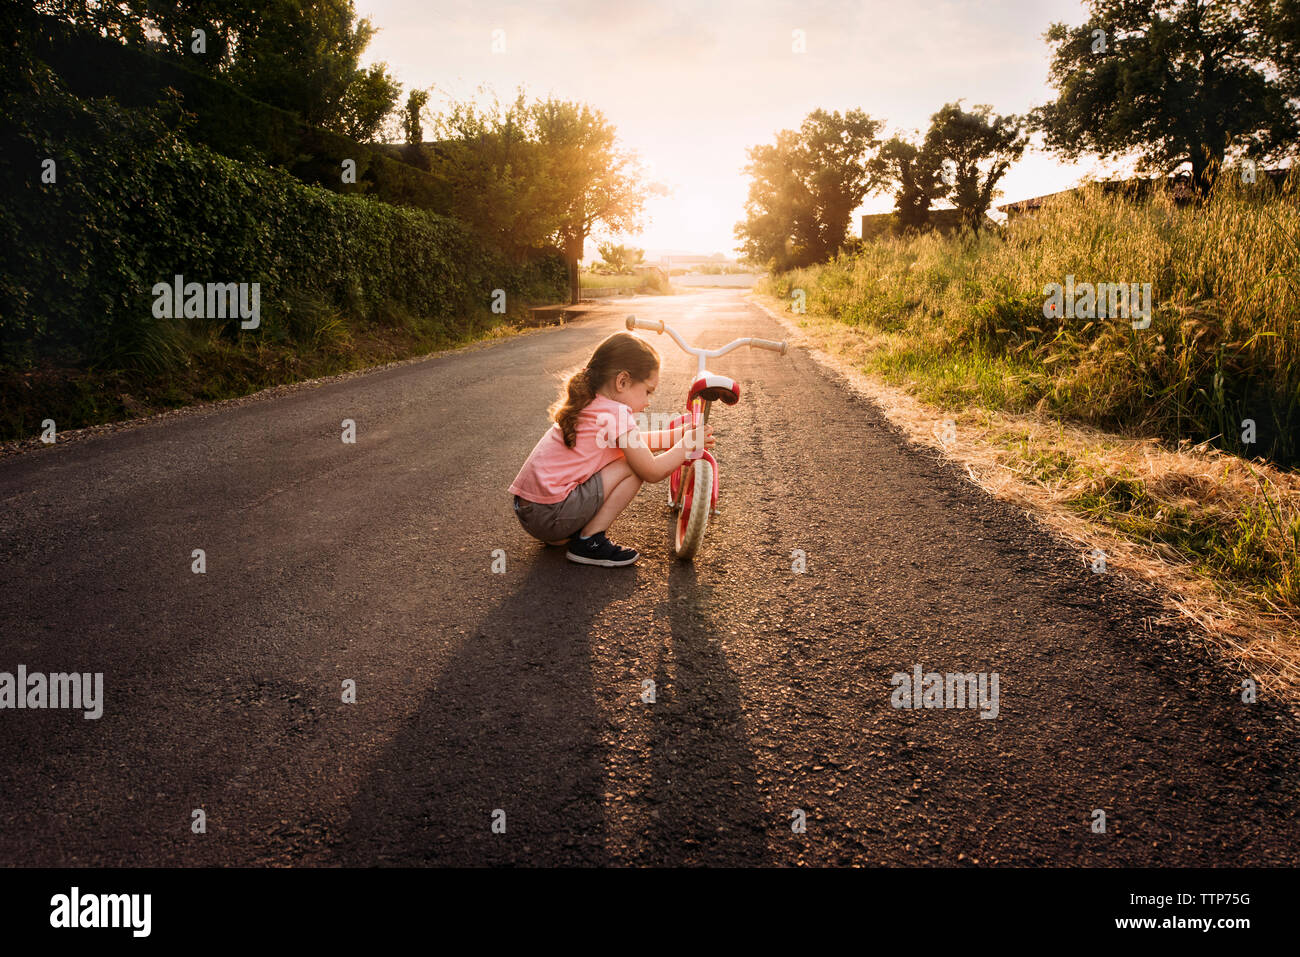 Little girl repairs balance bike in road at sunset with backlight Stock Photo